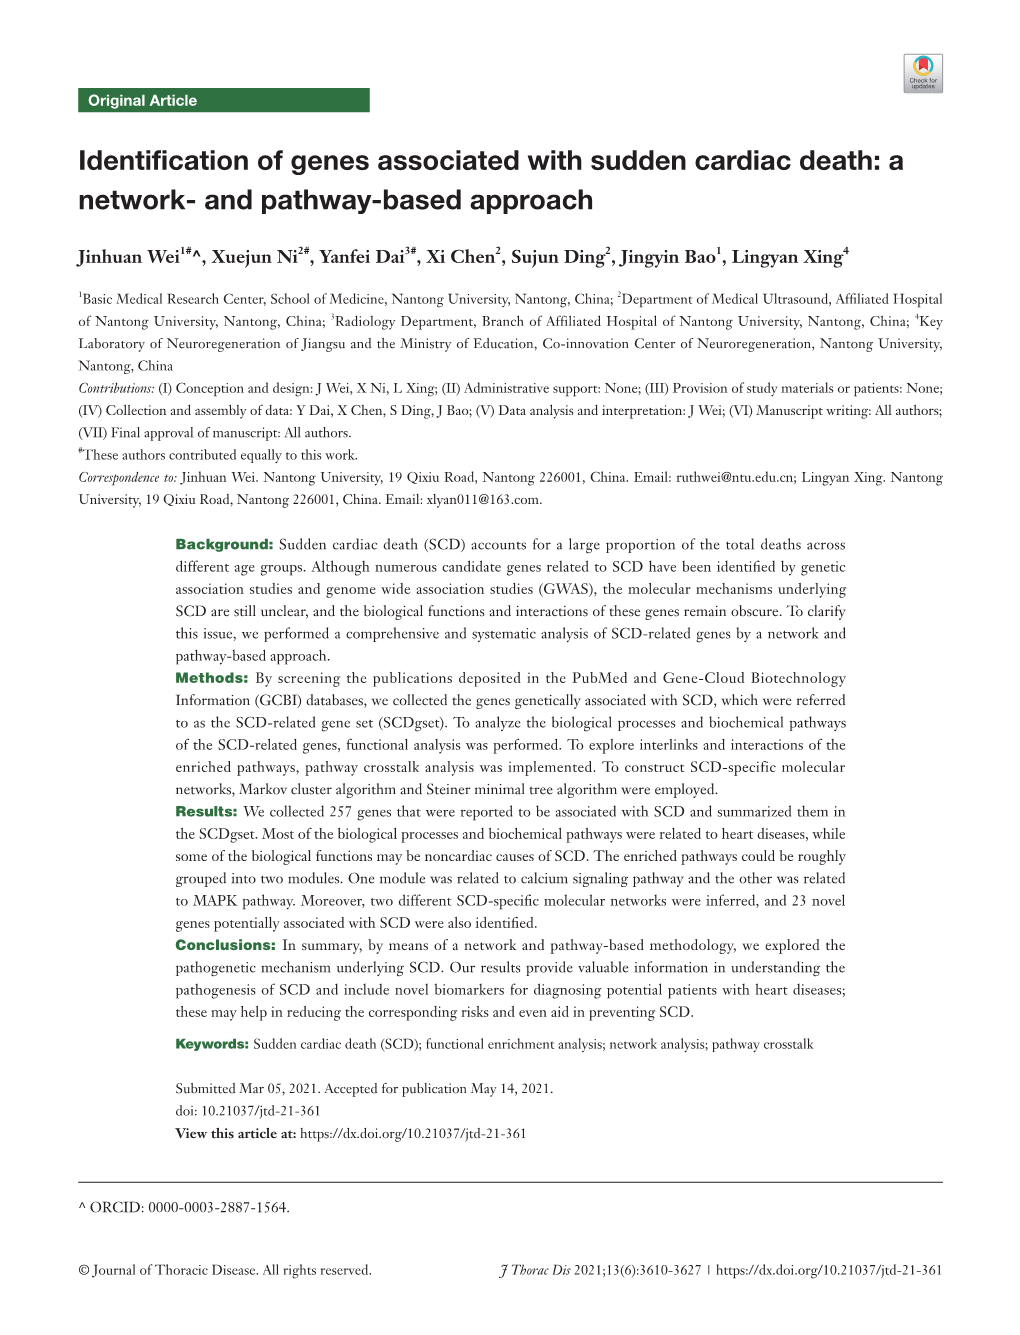 Identification of Genes Associated with Sudden Cardiac Death: a Network- and Pathway-Based Approach